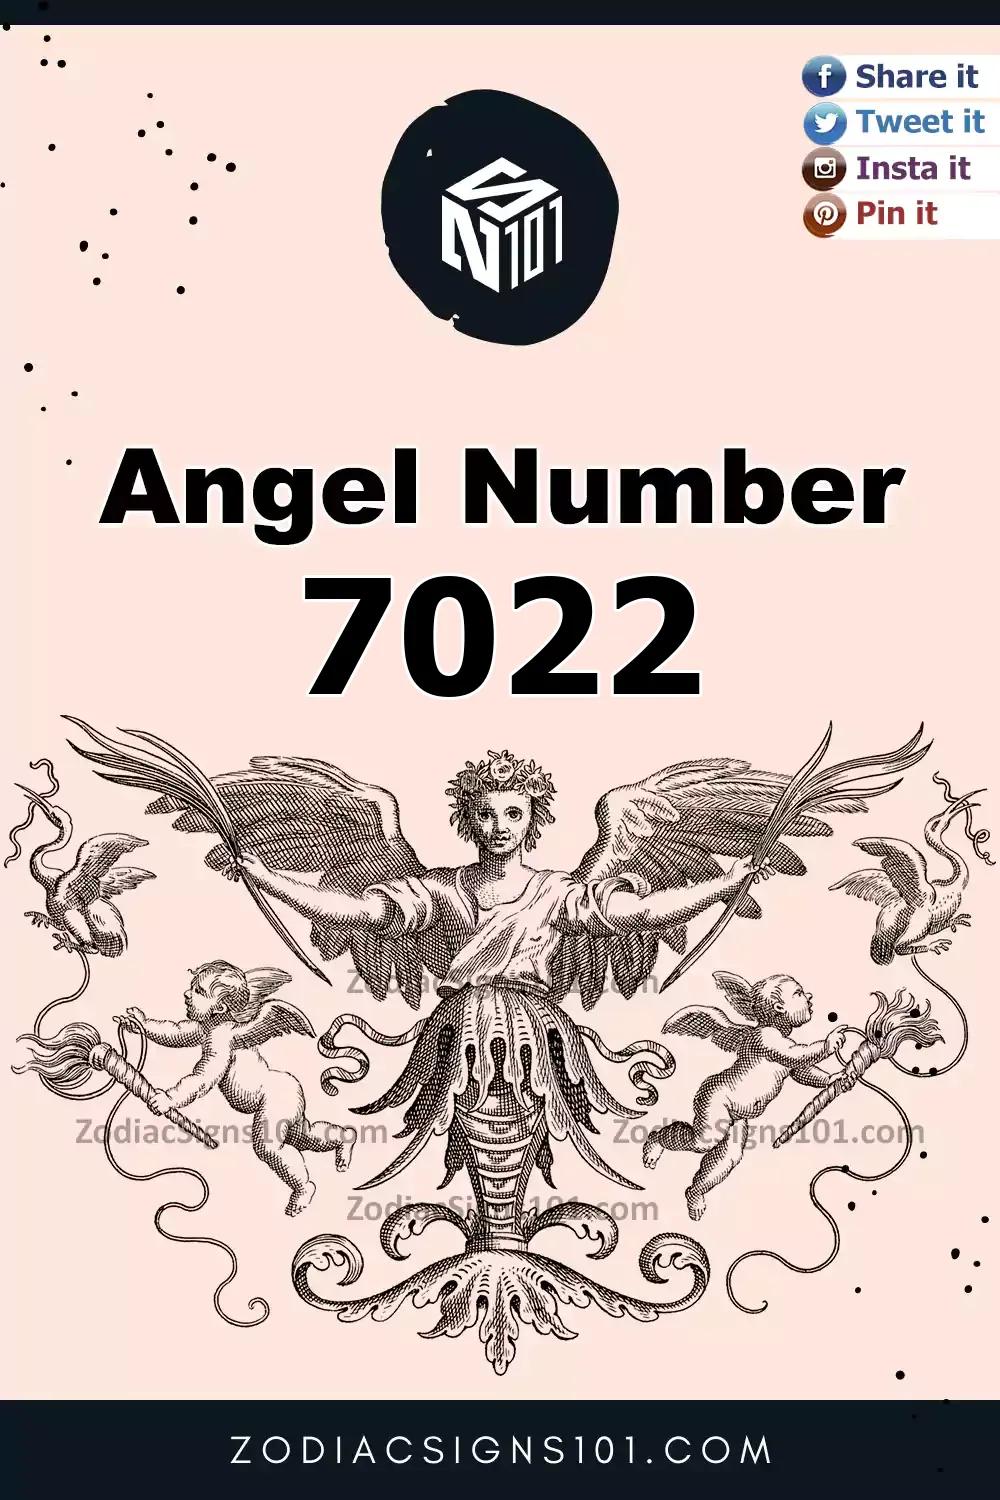 7022 Angel Number Meaning